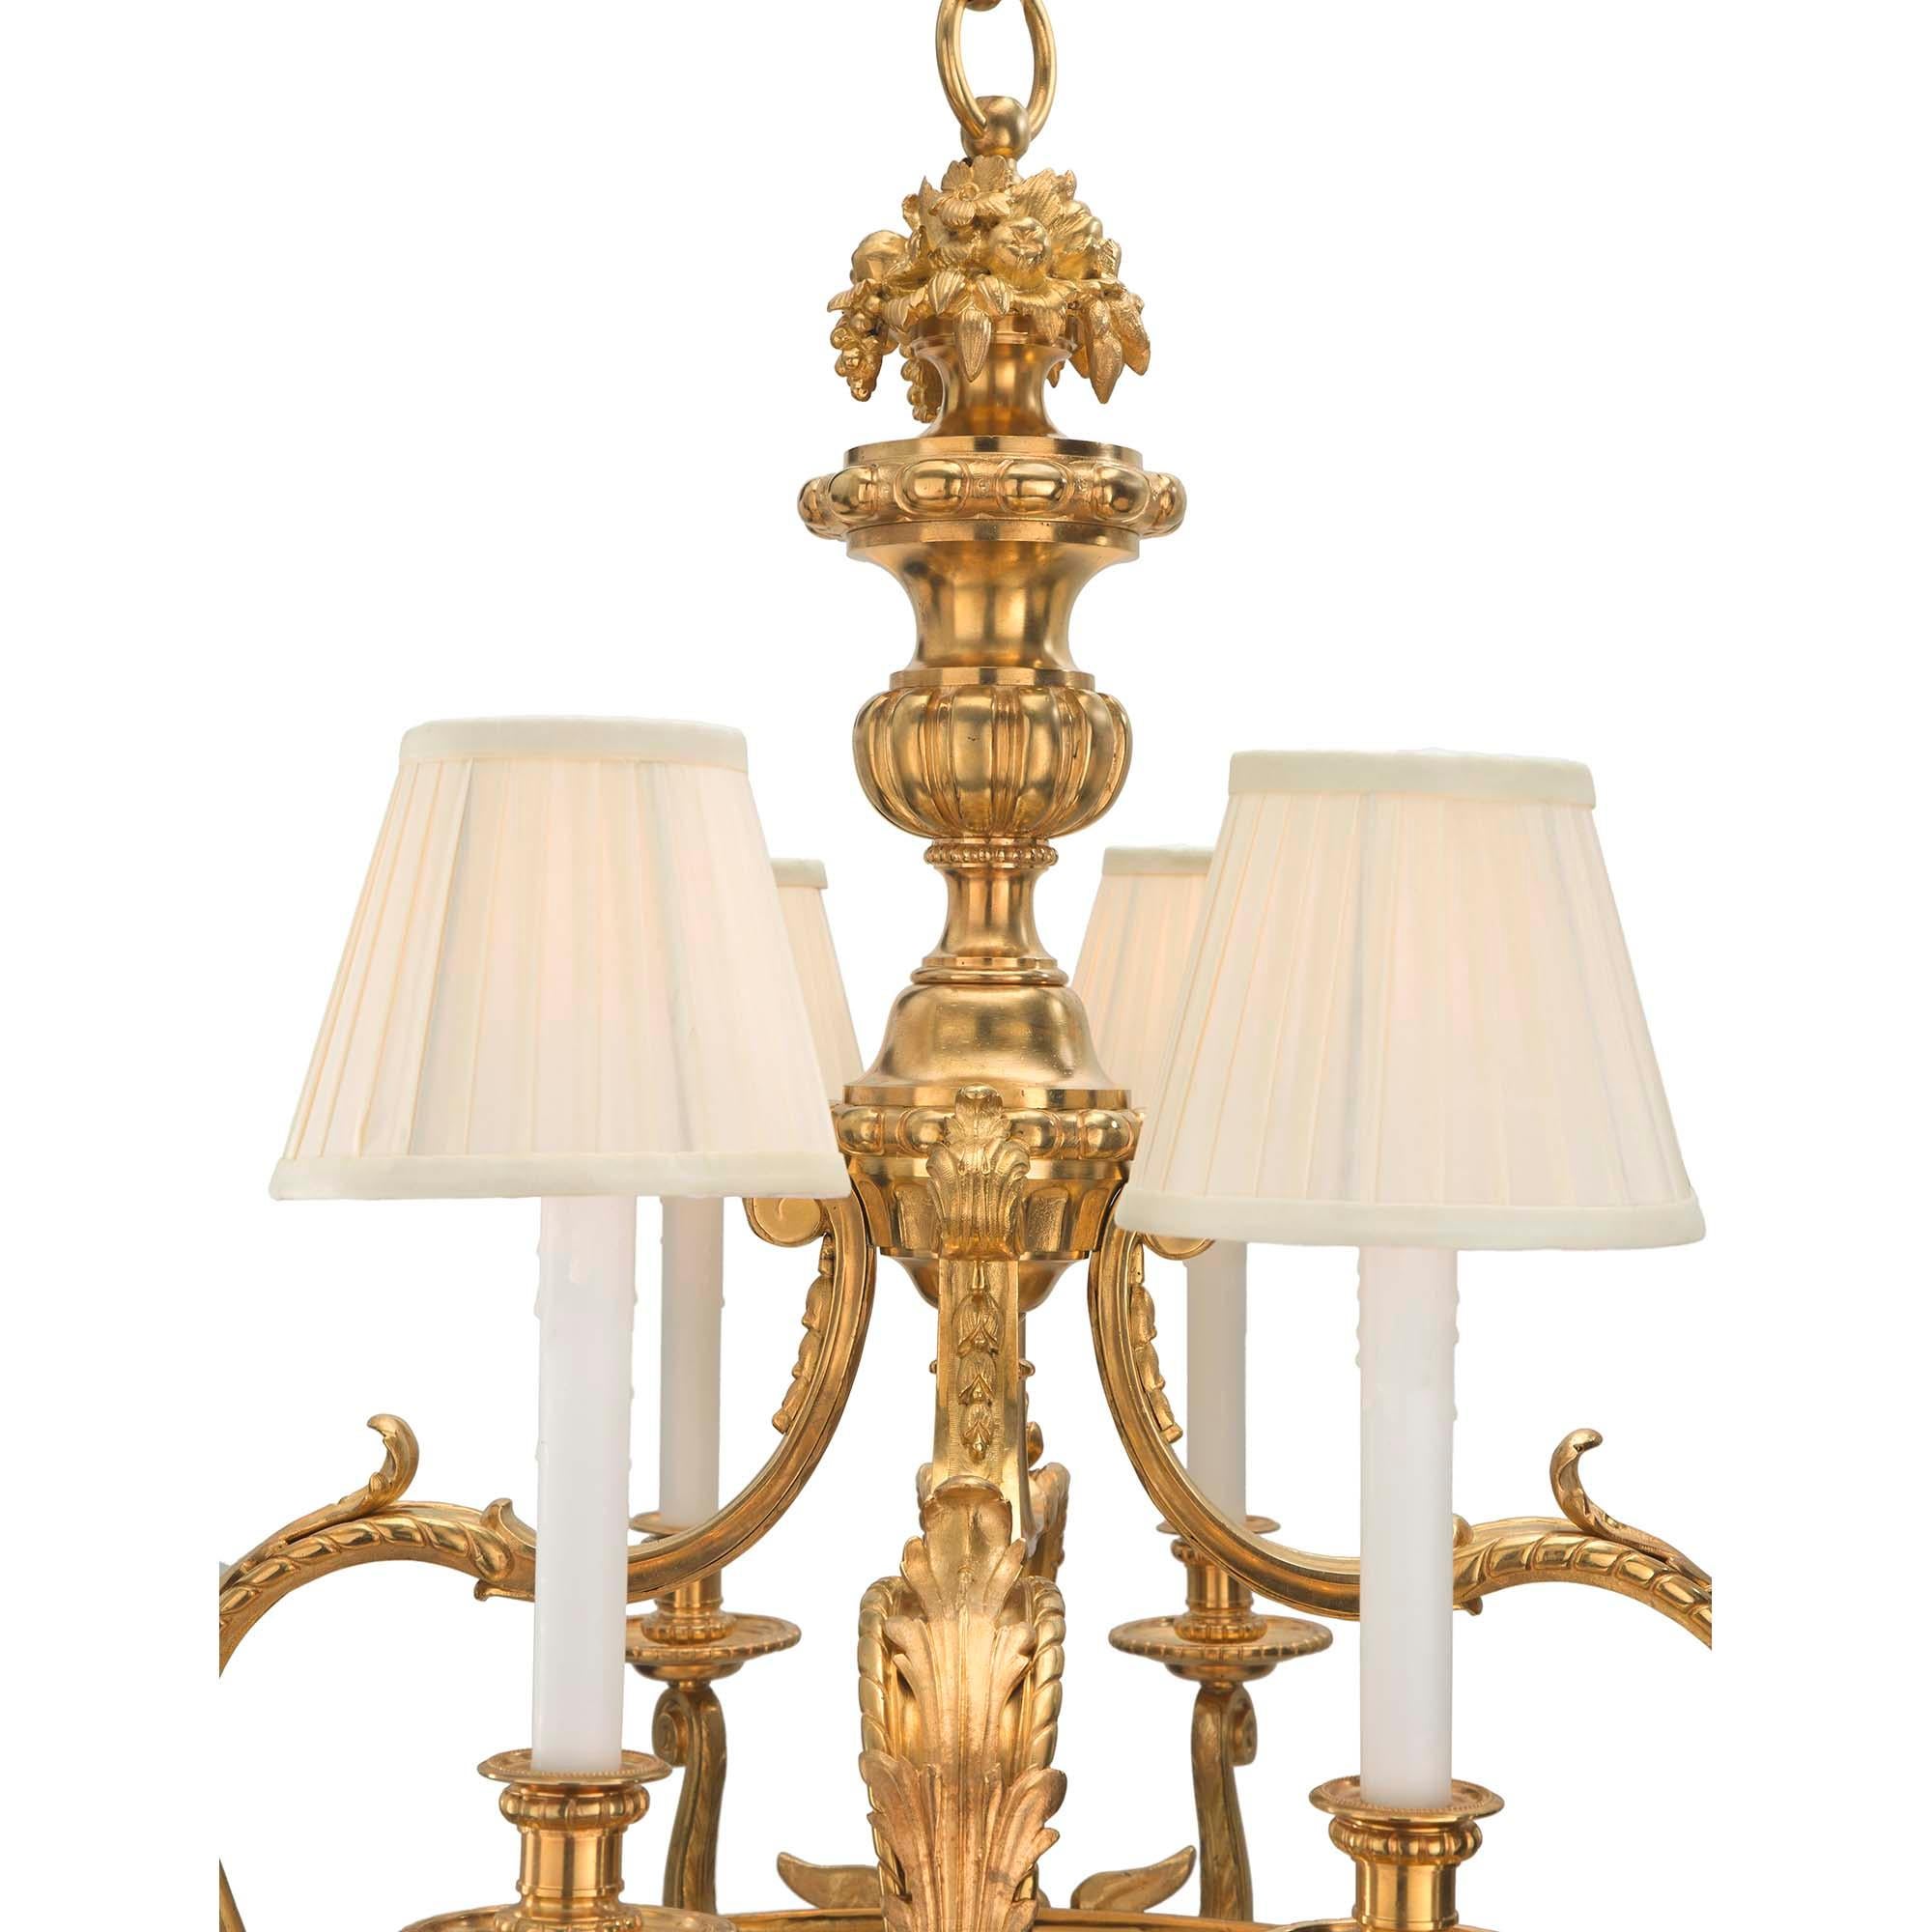 A stunning French 19th century Louis XVI st. ormolu and alabaster eight arm fourteen light chandelier. The chandelier is centered by a fine foliate finial below the impressive alabaster dome which houses six light bulbs offering a warm glow